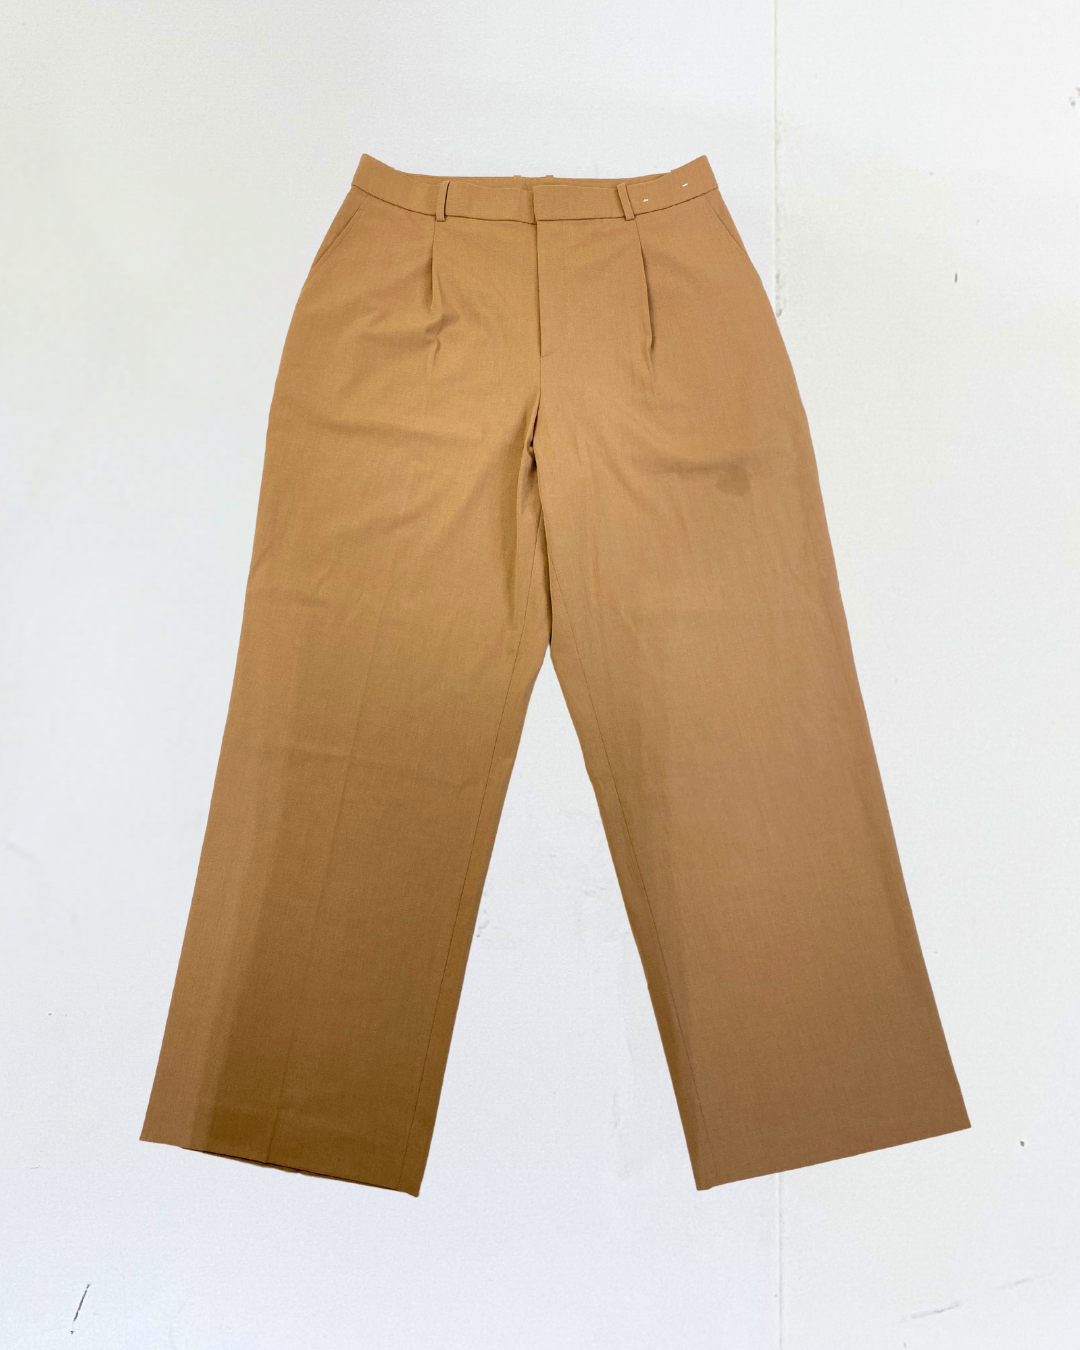 Uniqlo Tailored Camel Trousers Size XL